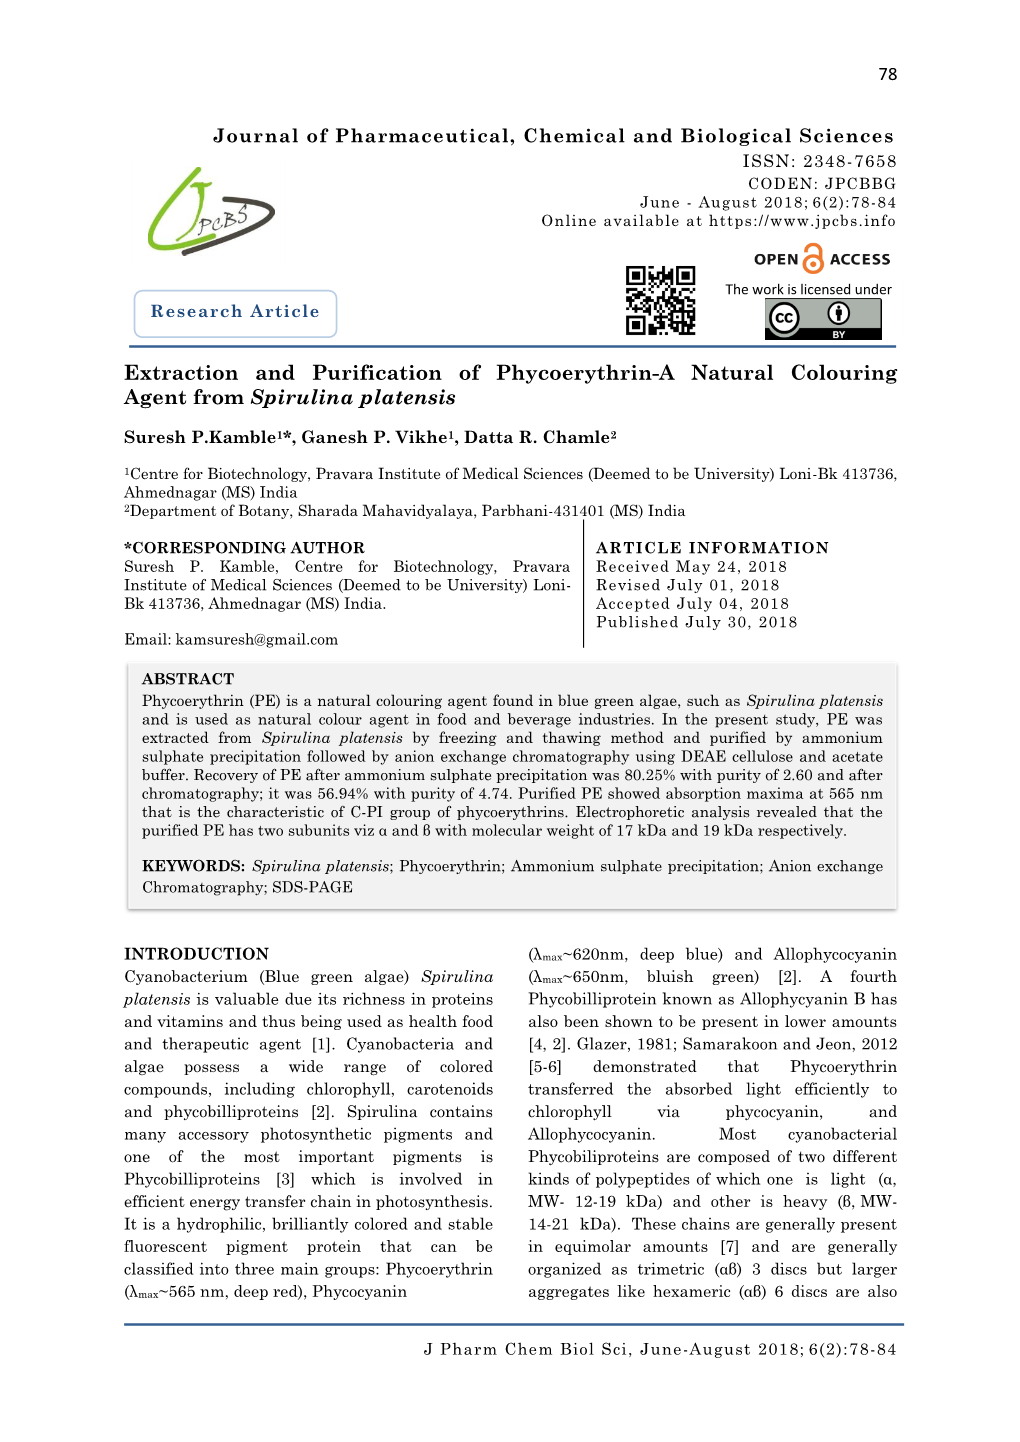 Extraction and Purification of Phycoerythrin-A Natural Colouring Agent from Spirulina Platensis